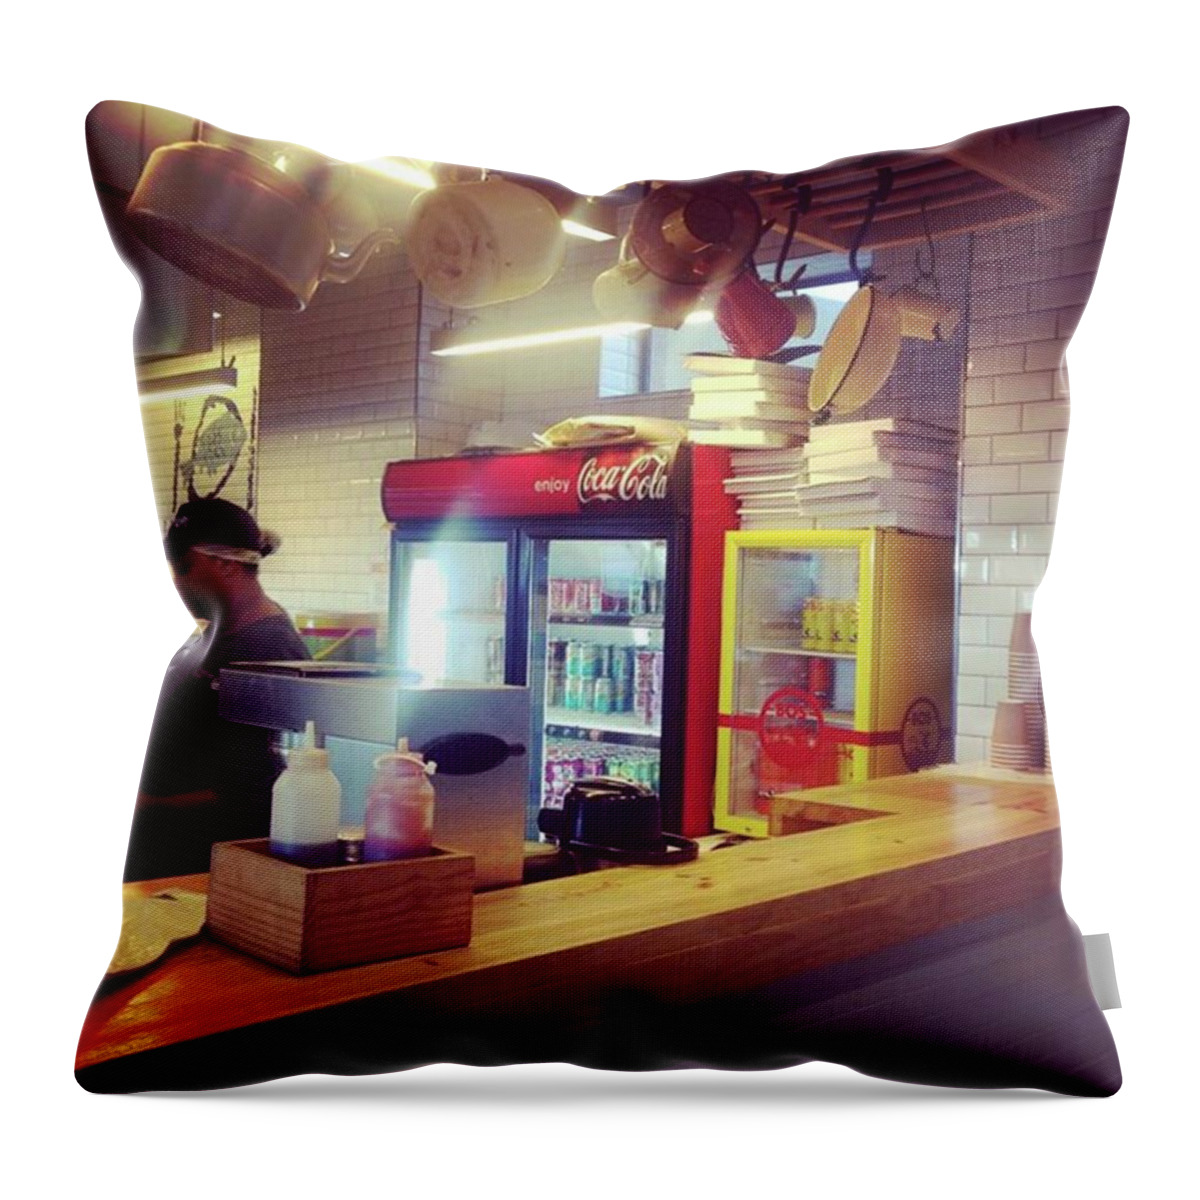 Muizenberg Throw Pillow featuring the photograph An Afternoon Swim. Fish And Chips. Life by Jacci Freimond Rudling